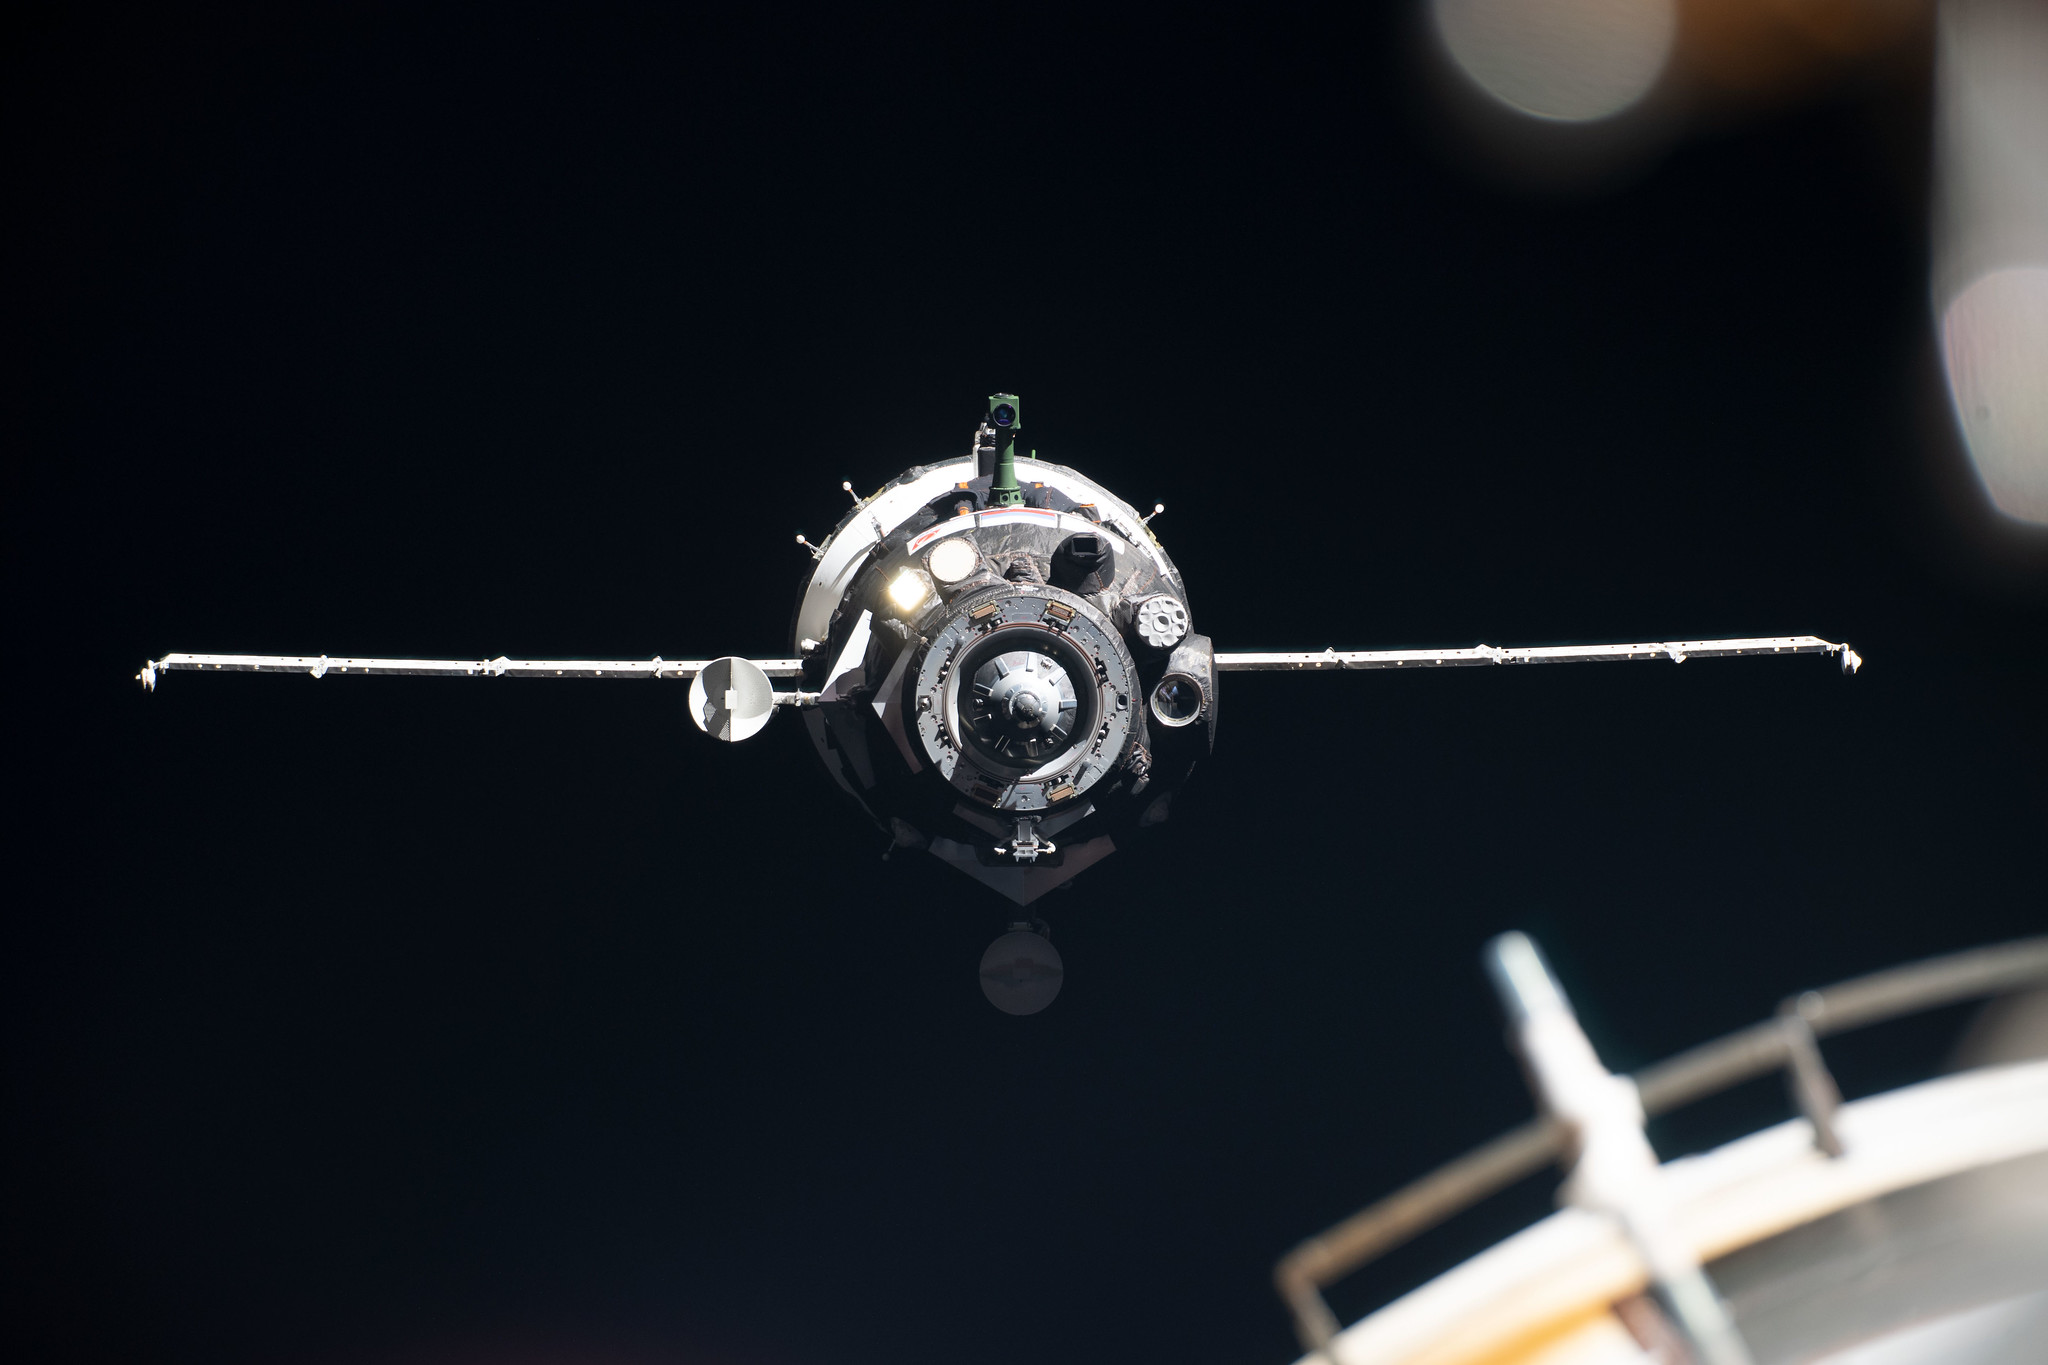 The Soyuz MS-13 crew spacecraft is seen as it approached the International Space Station for docking